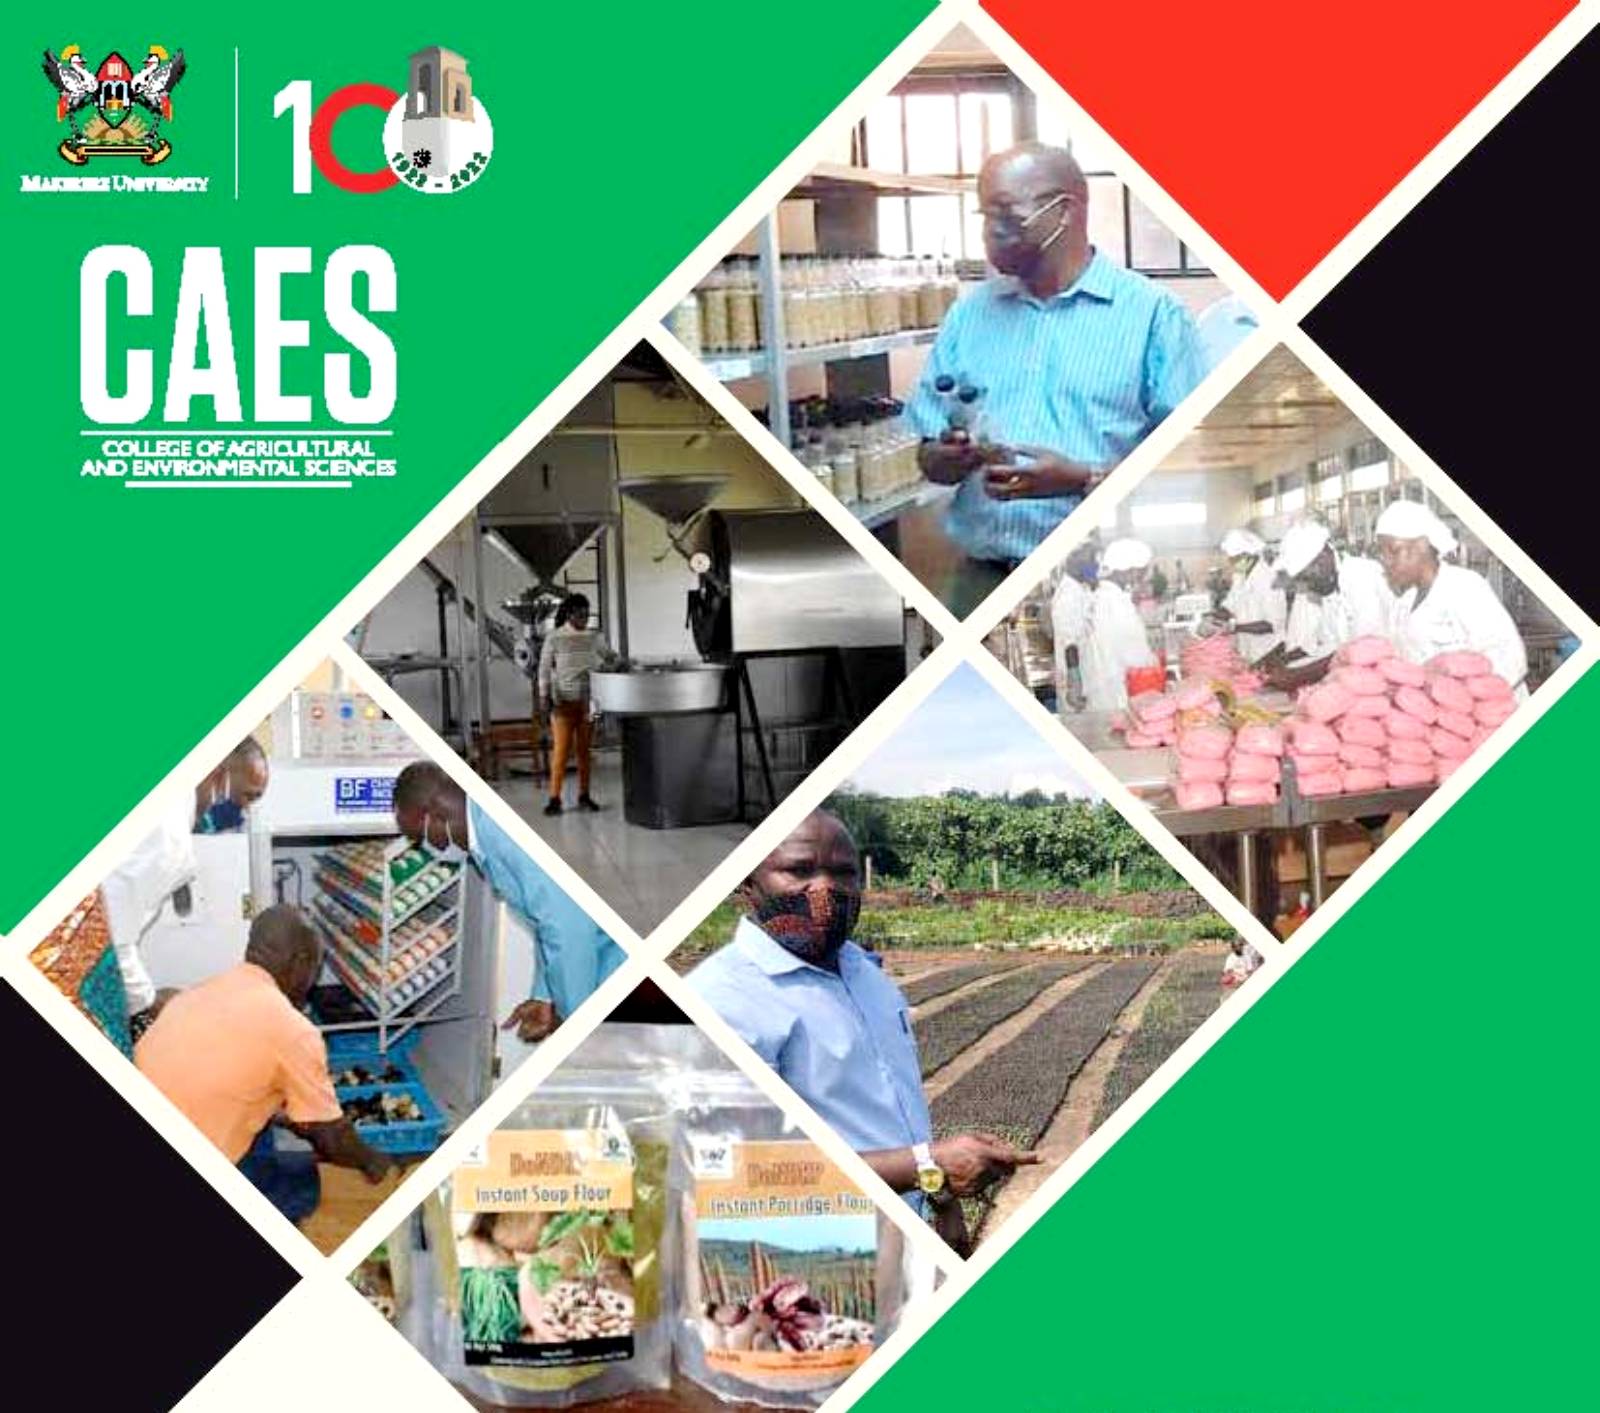 Cover Page of the College of Agricultural and Environmental Sciences (CAES) Annual Report 2021.